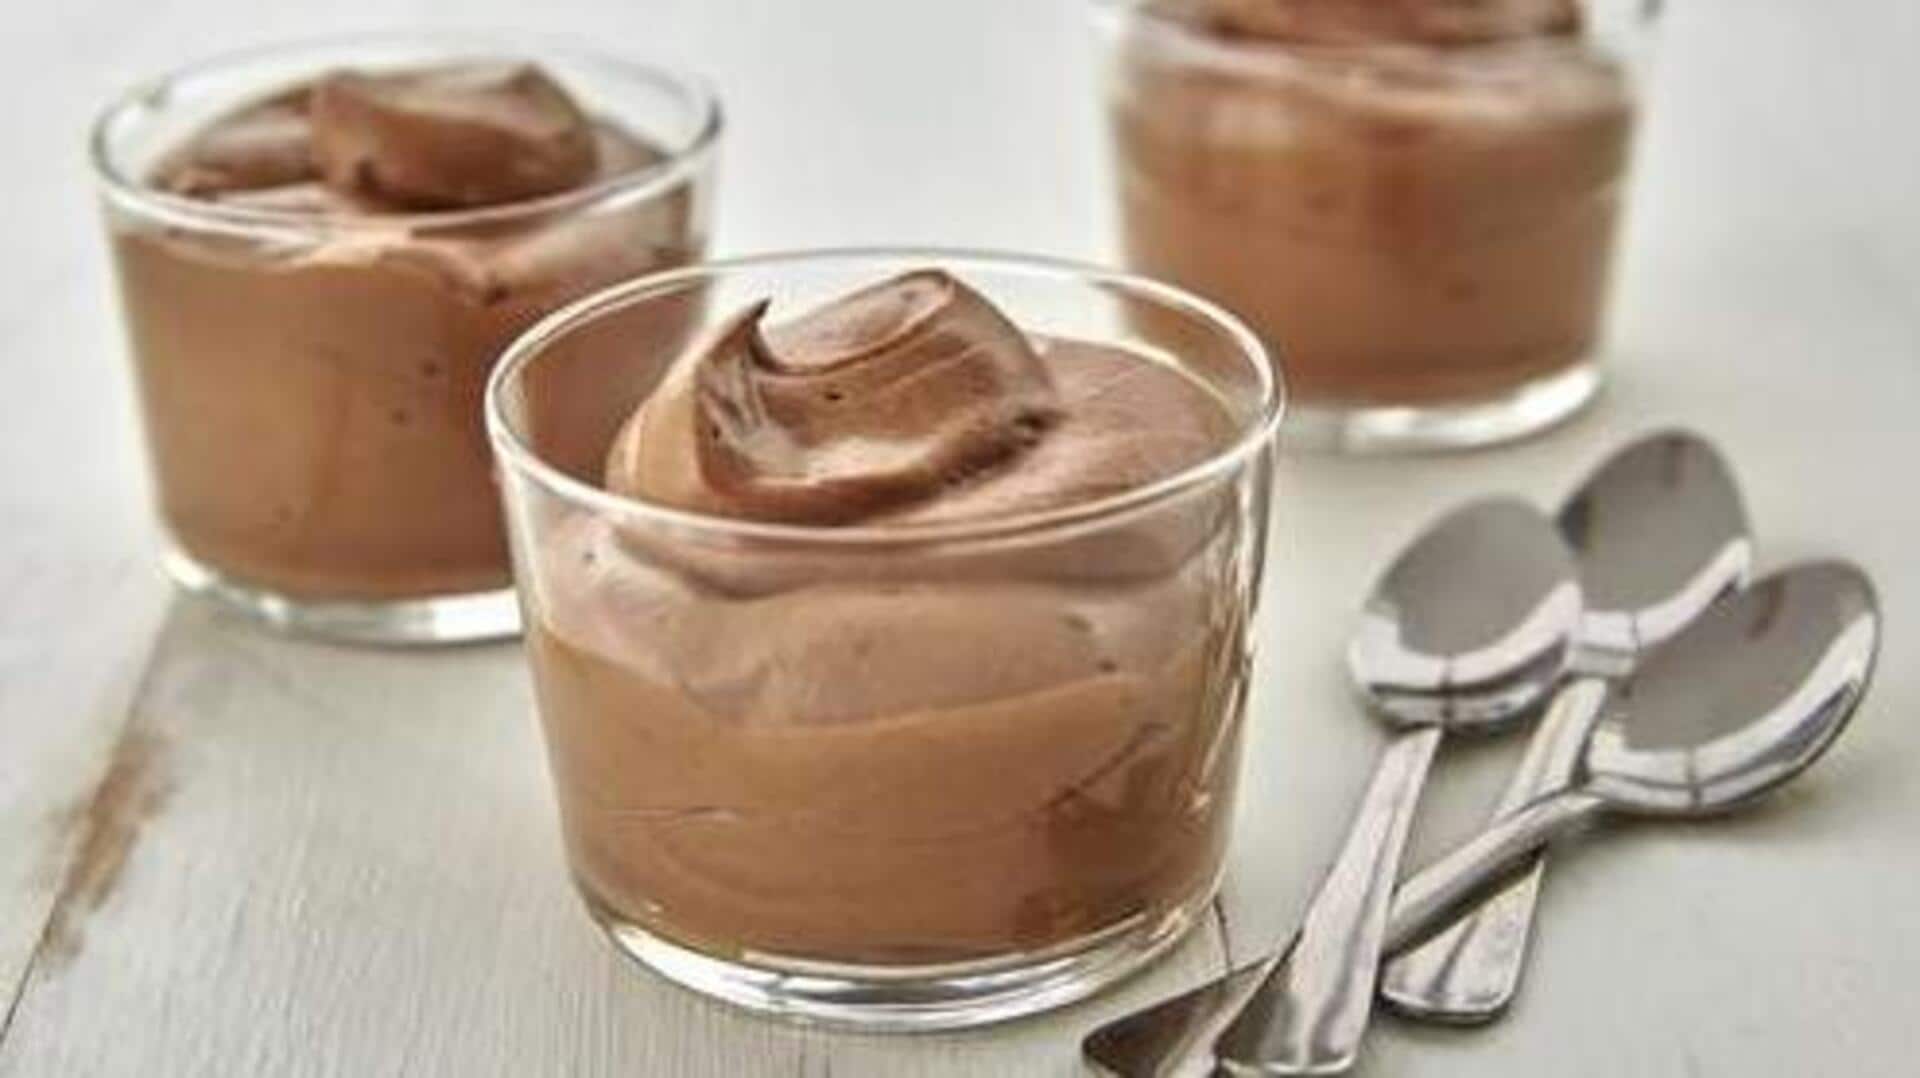 Tuck into these decadent dairy-free chocolate mousses